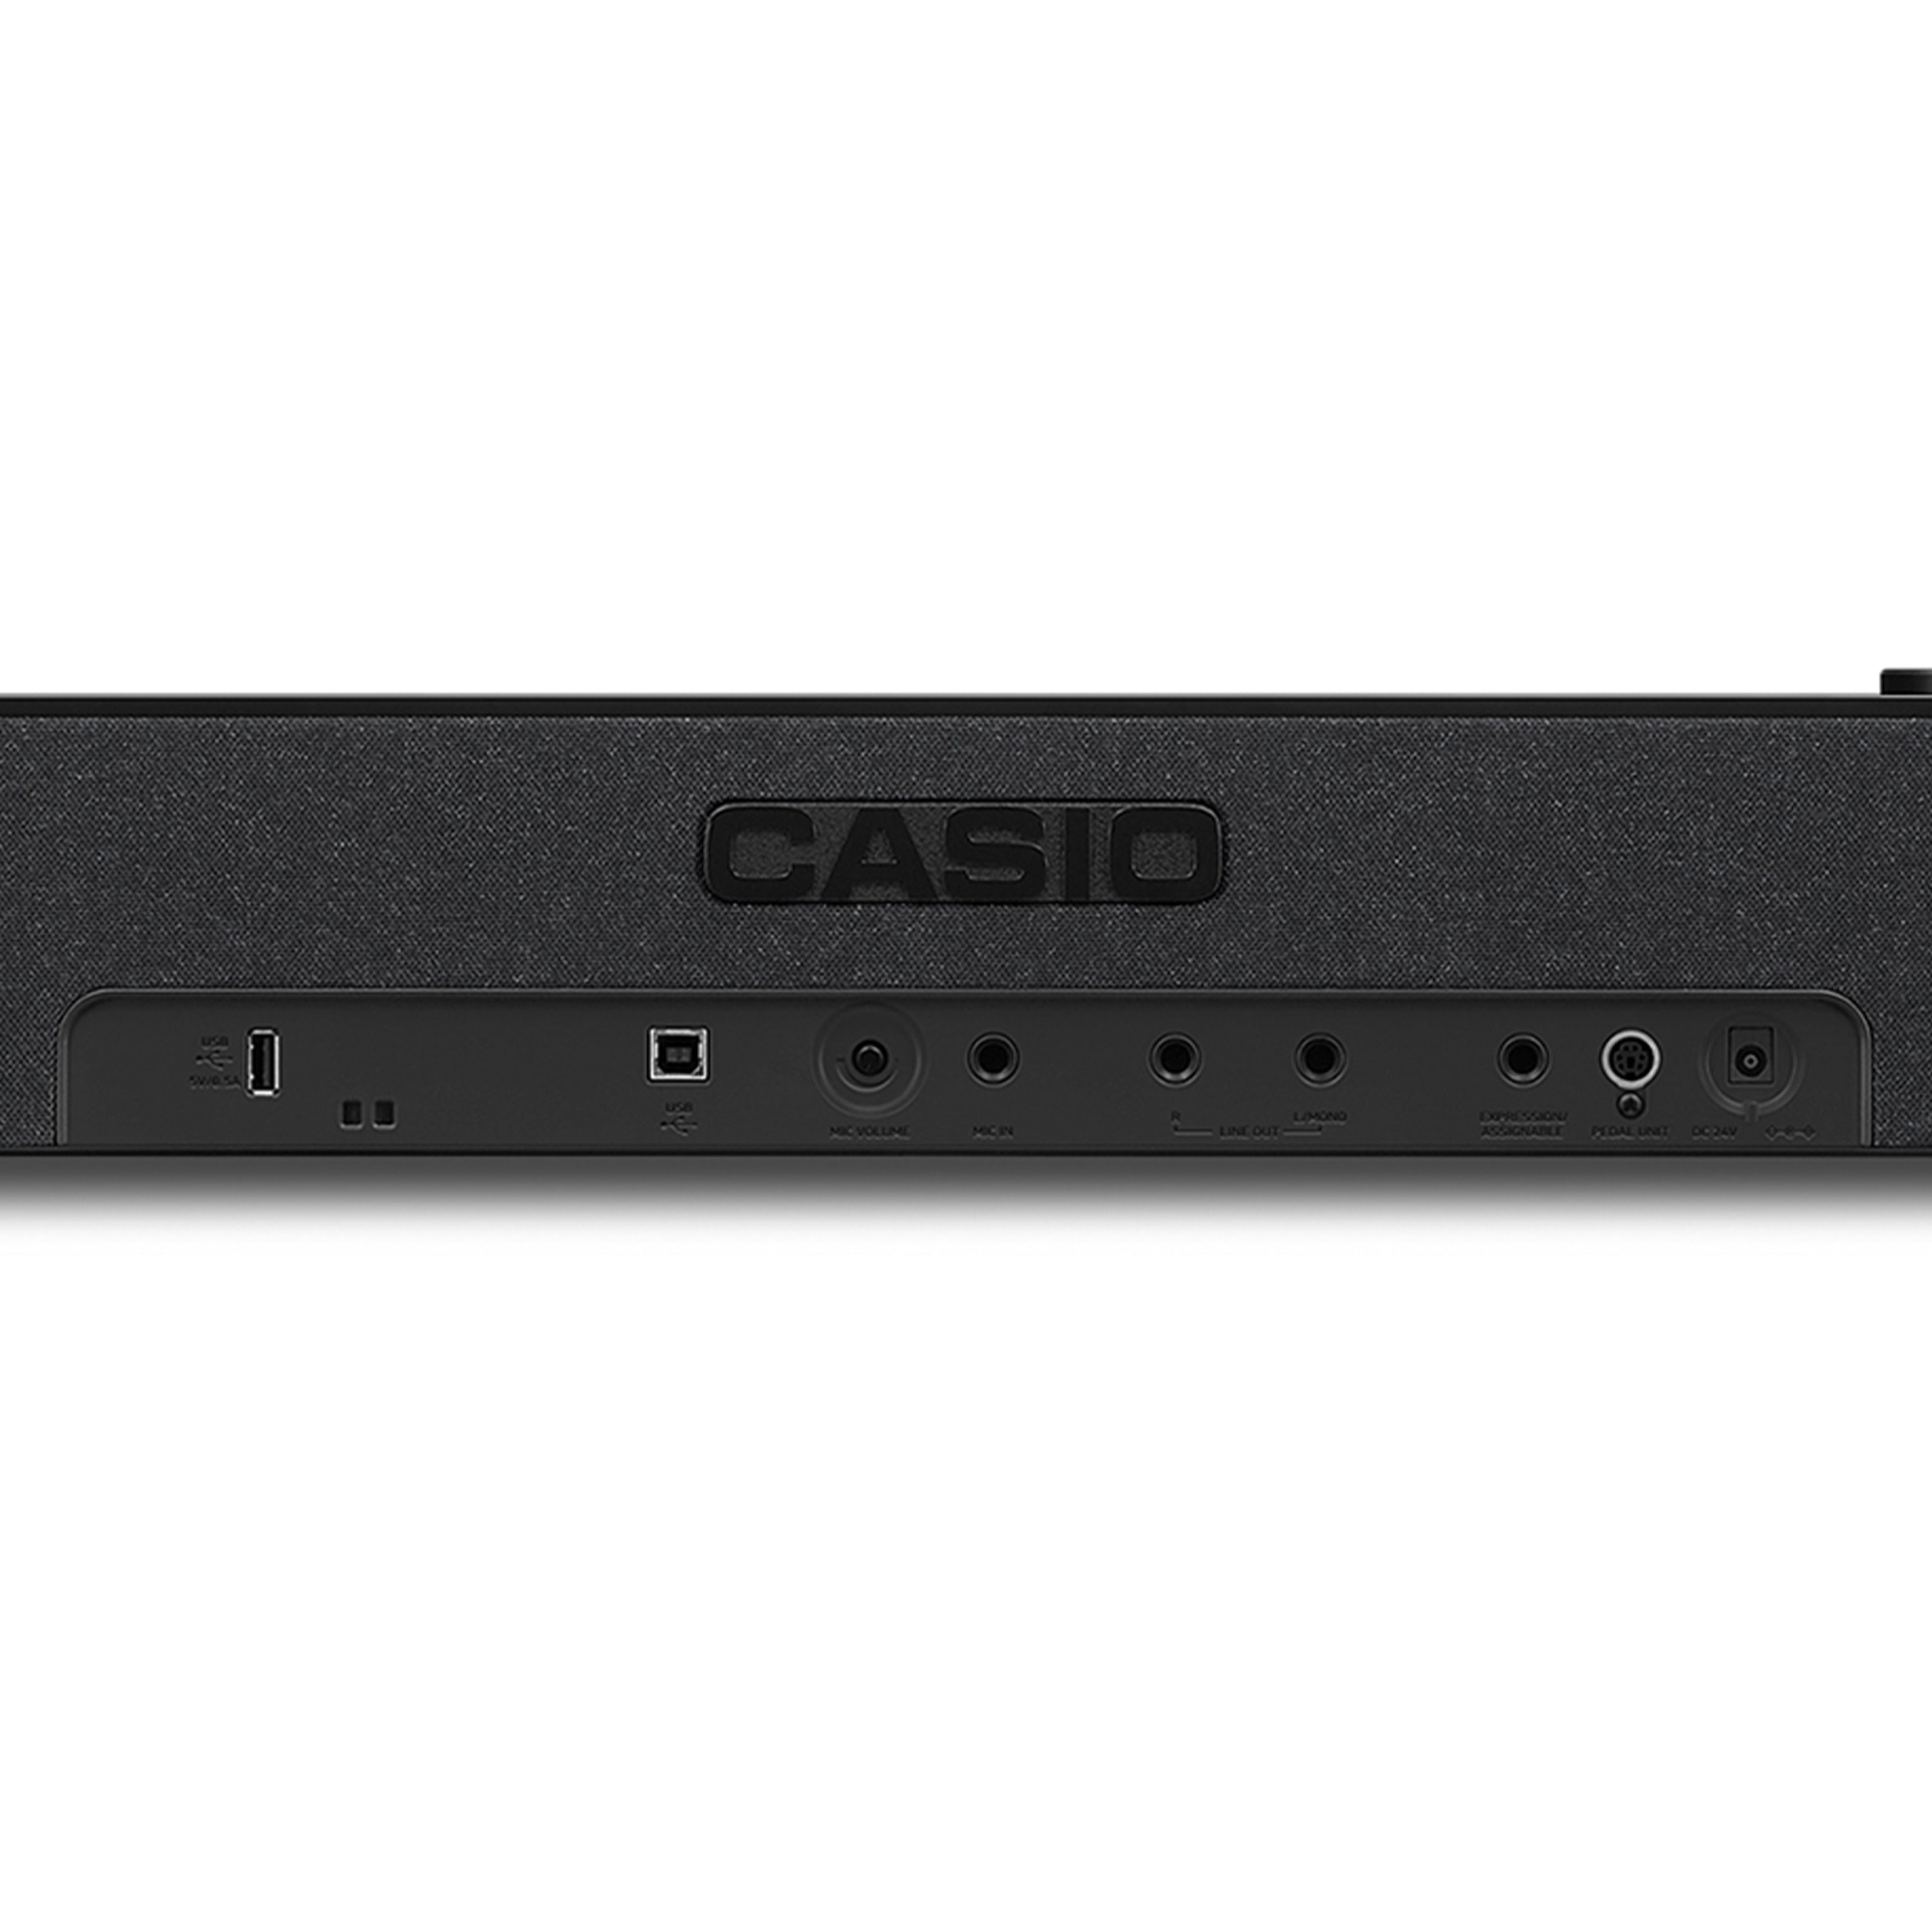 Casio PXS7000 black Digital Piano - Back panel inputs and outputs